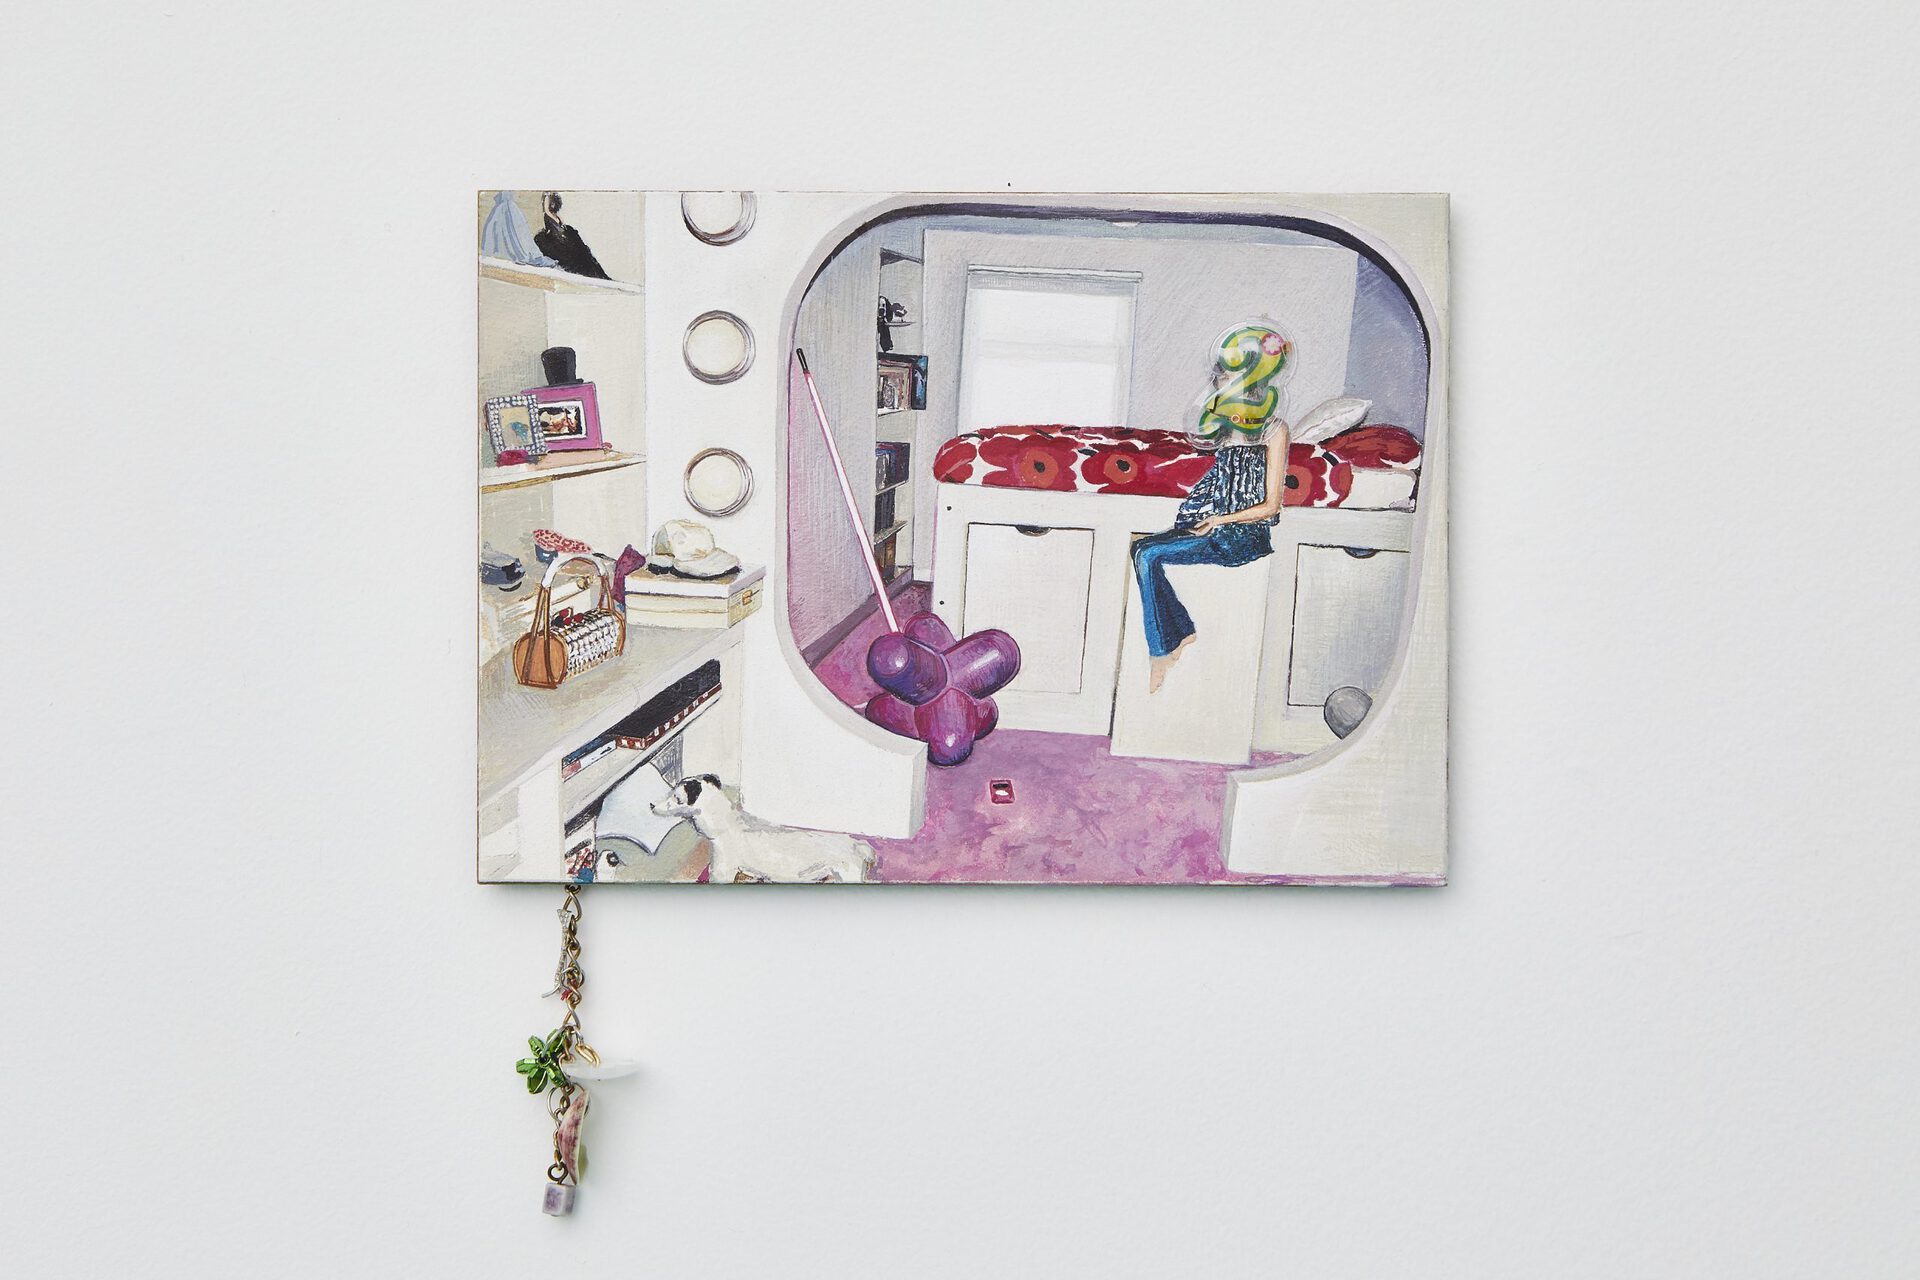 Jordan Barse Thus, the dressmaker's dummy, 2020 Gouache and sticker, chain and charms on aquaboard